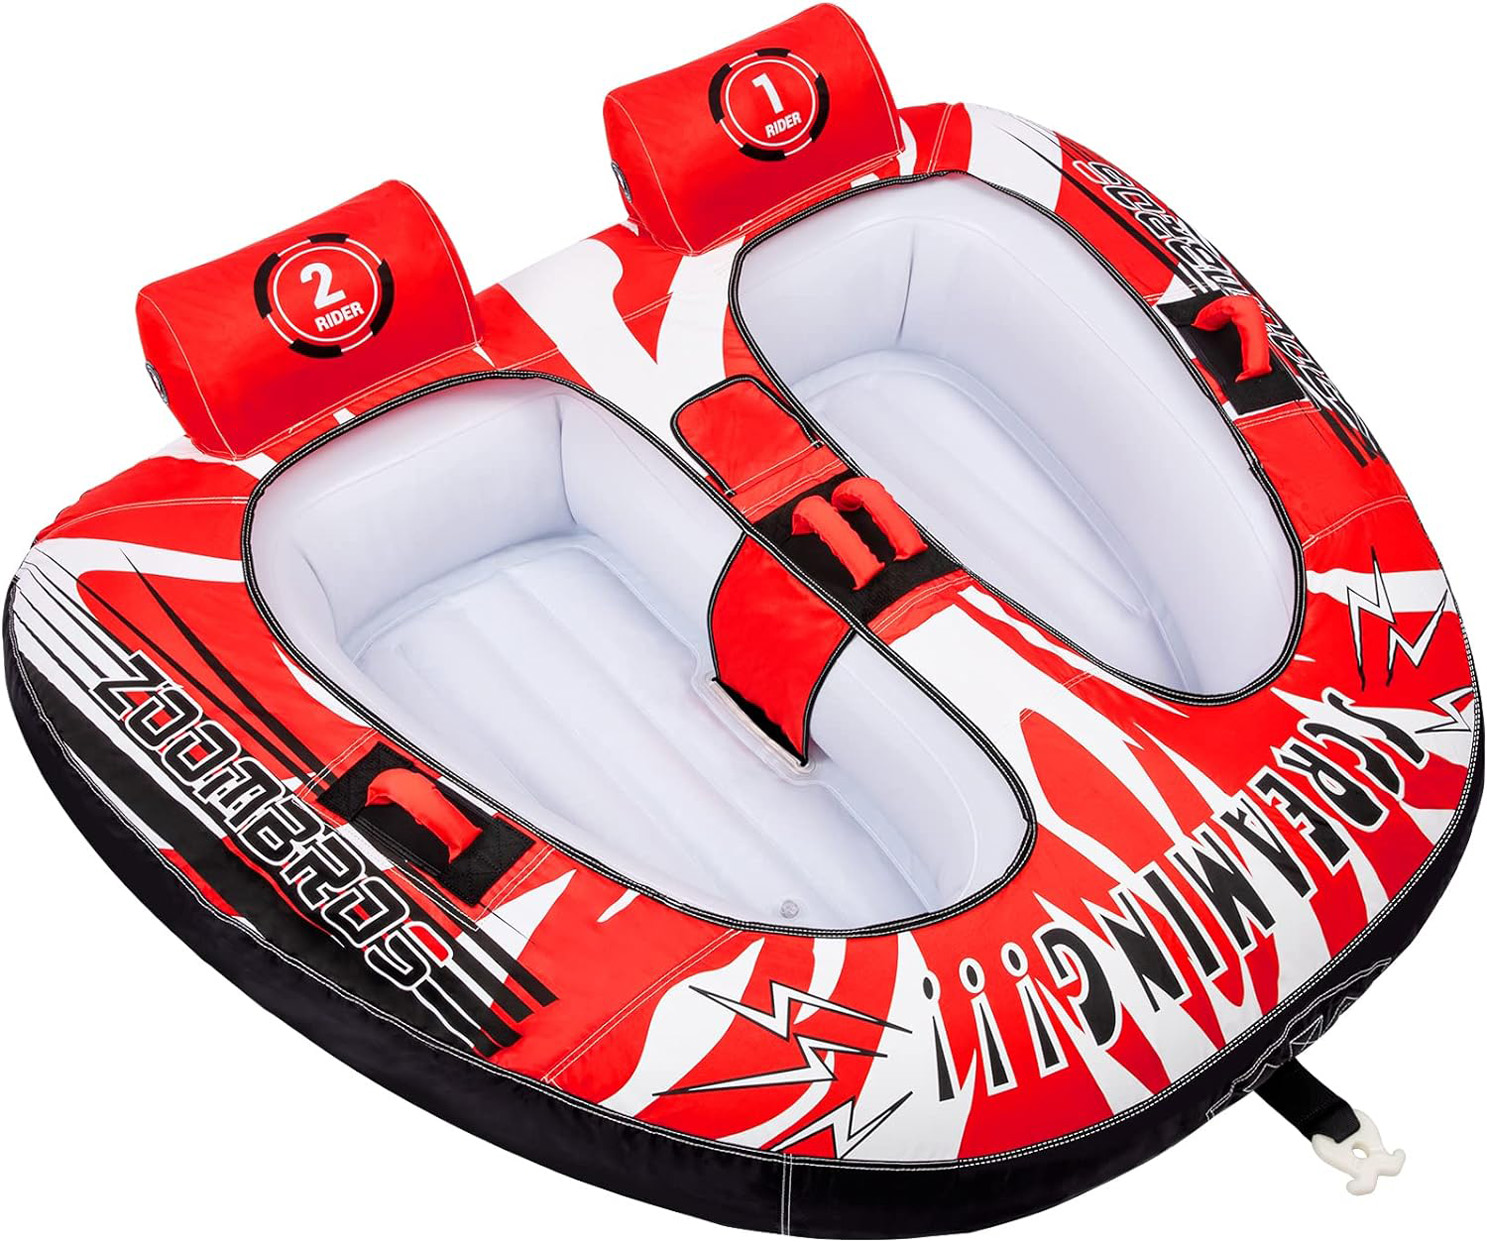 Zoombros Inflatable Towable Tubes for Boating, 2 Persons